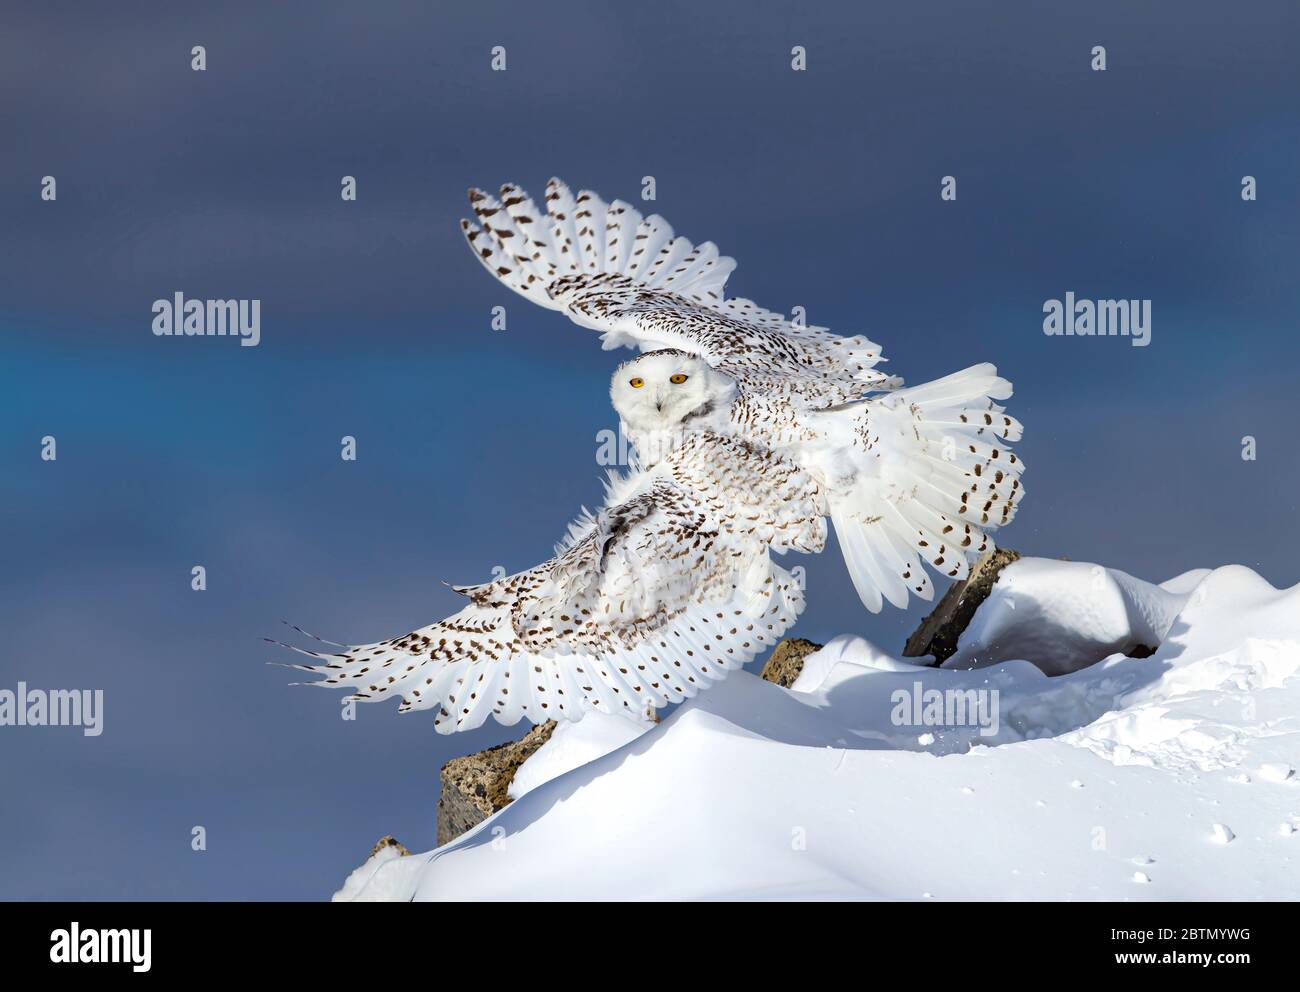 Snowy owl isolated against a blue background with wings spread wide takes flight to hunt over a snow covered field in Ottawa, Canada Stock Photo